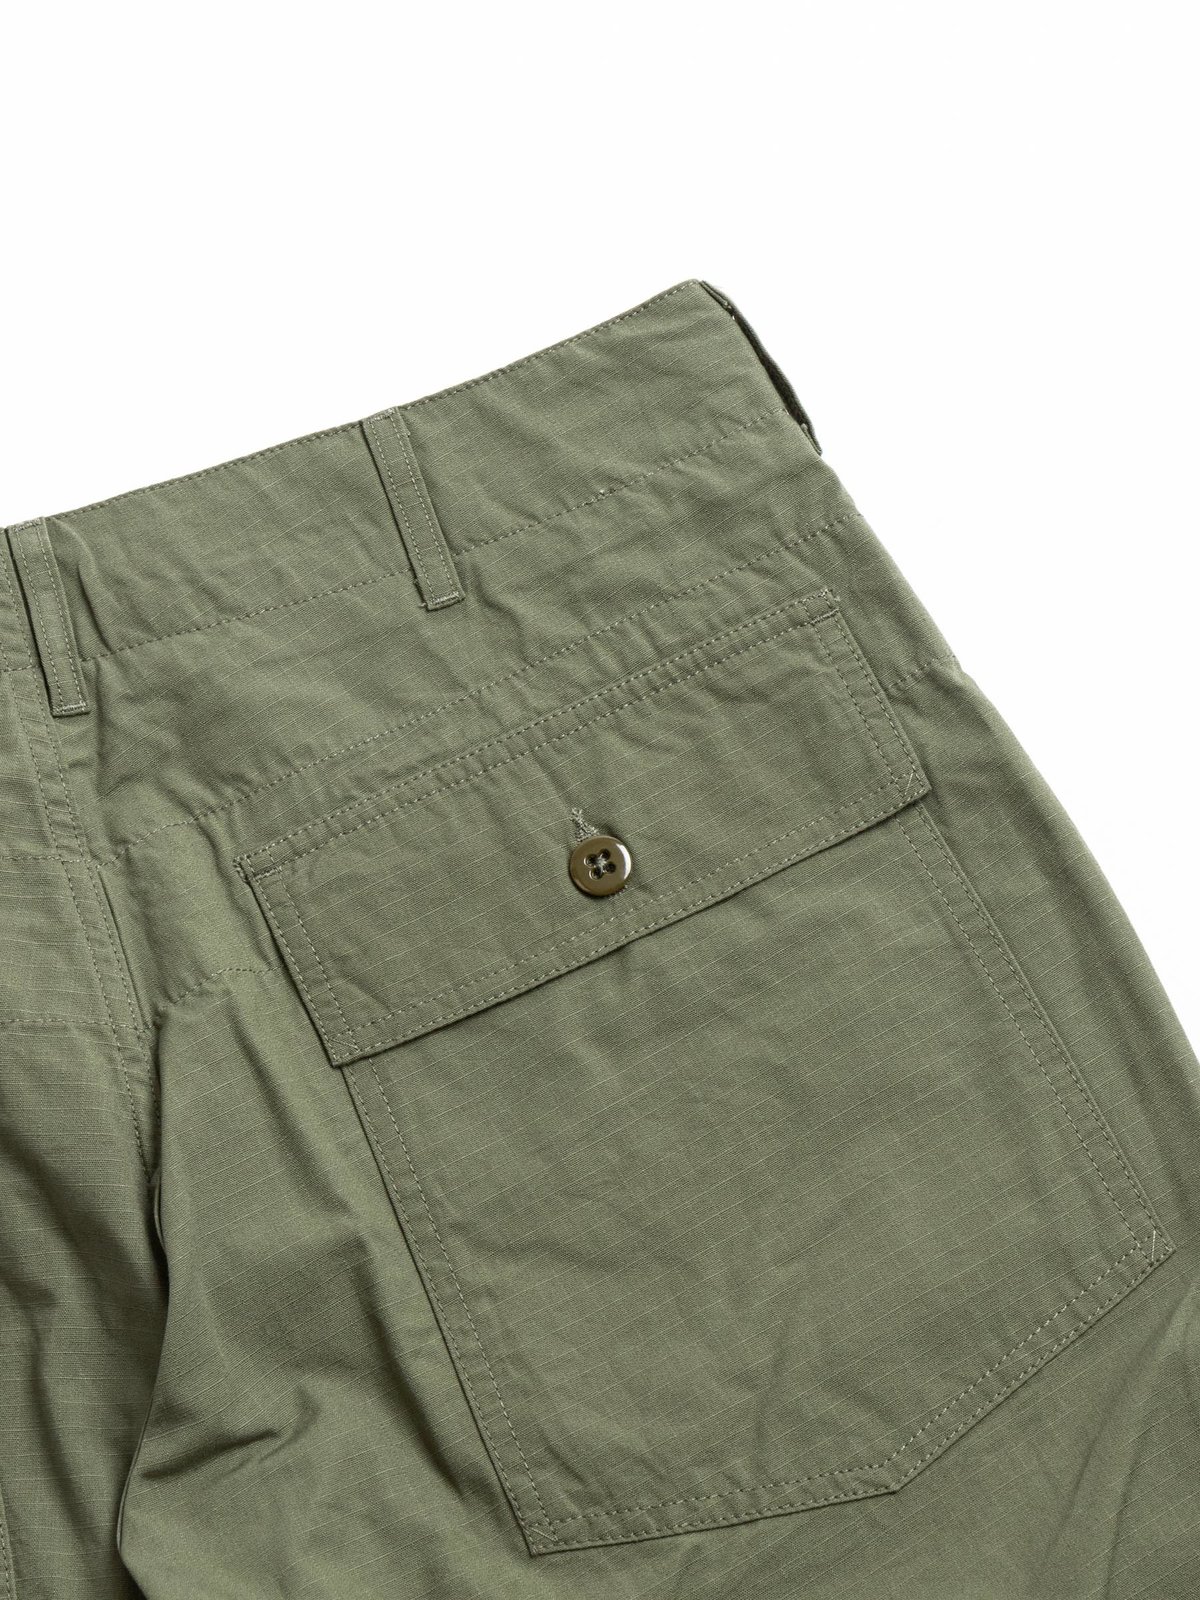 FATIGUE PANT OLIVE COTTON RIPSTOP - Image 6